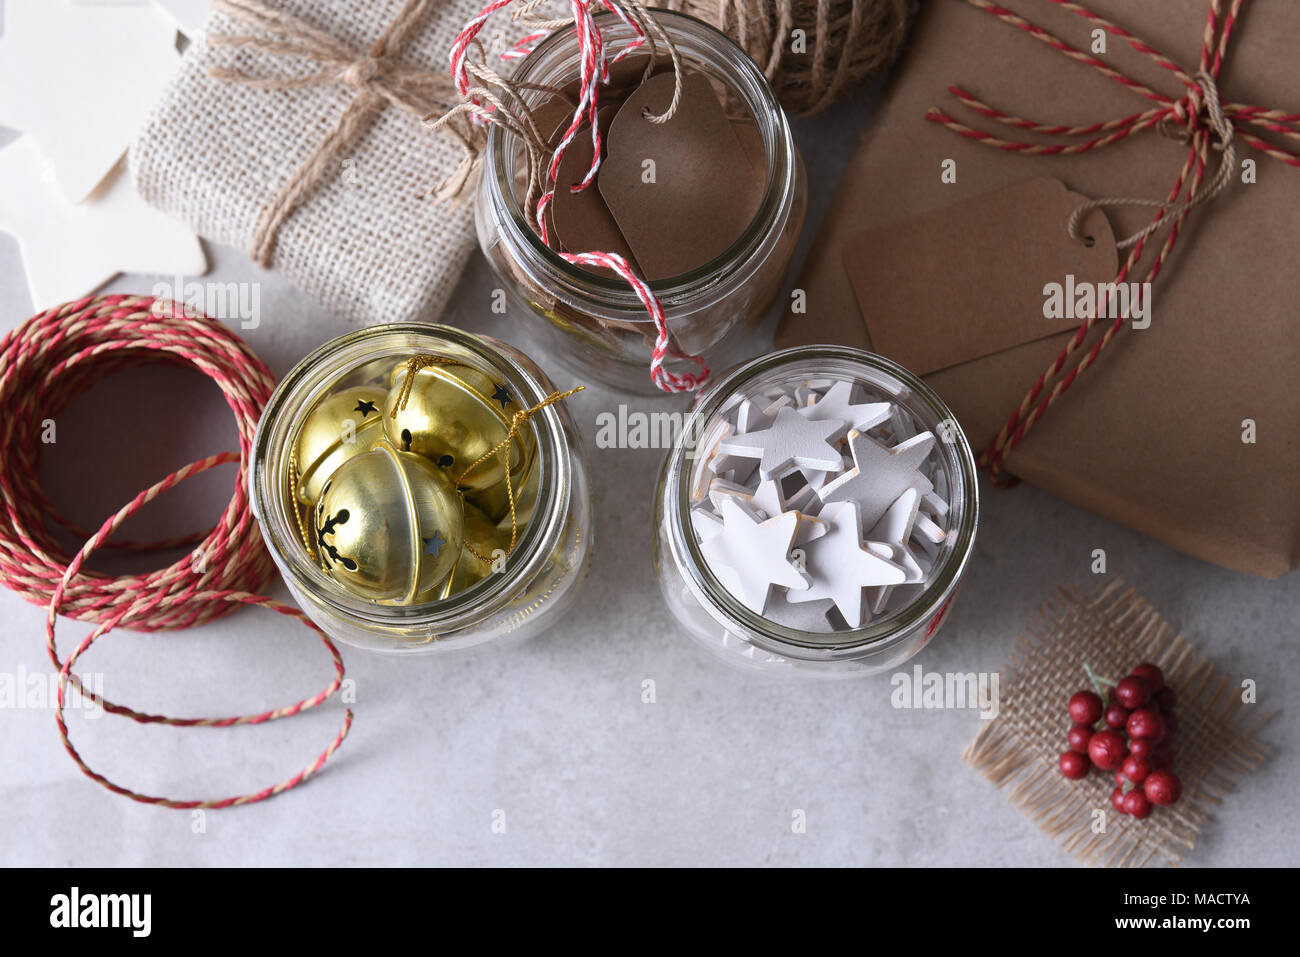 Christmas present wrapping supplies. High angle shot of three mason jars with gift tags, wood stars, and sleigh bells agains a rustic white wood wall. Stock Photo